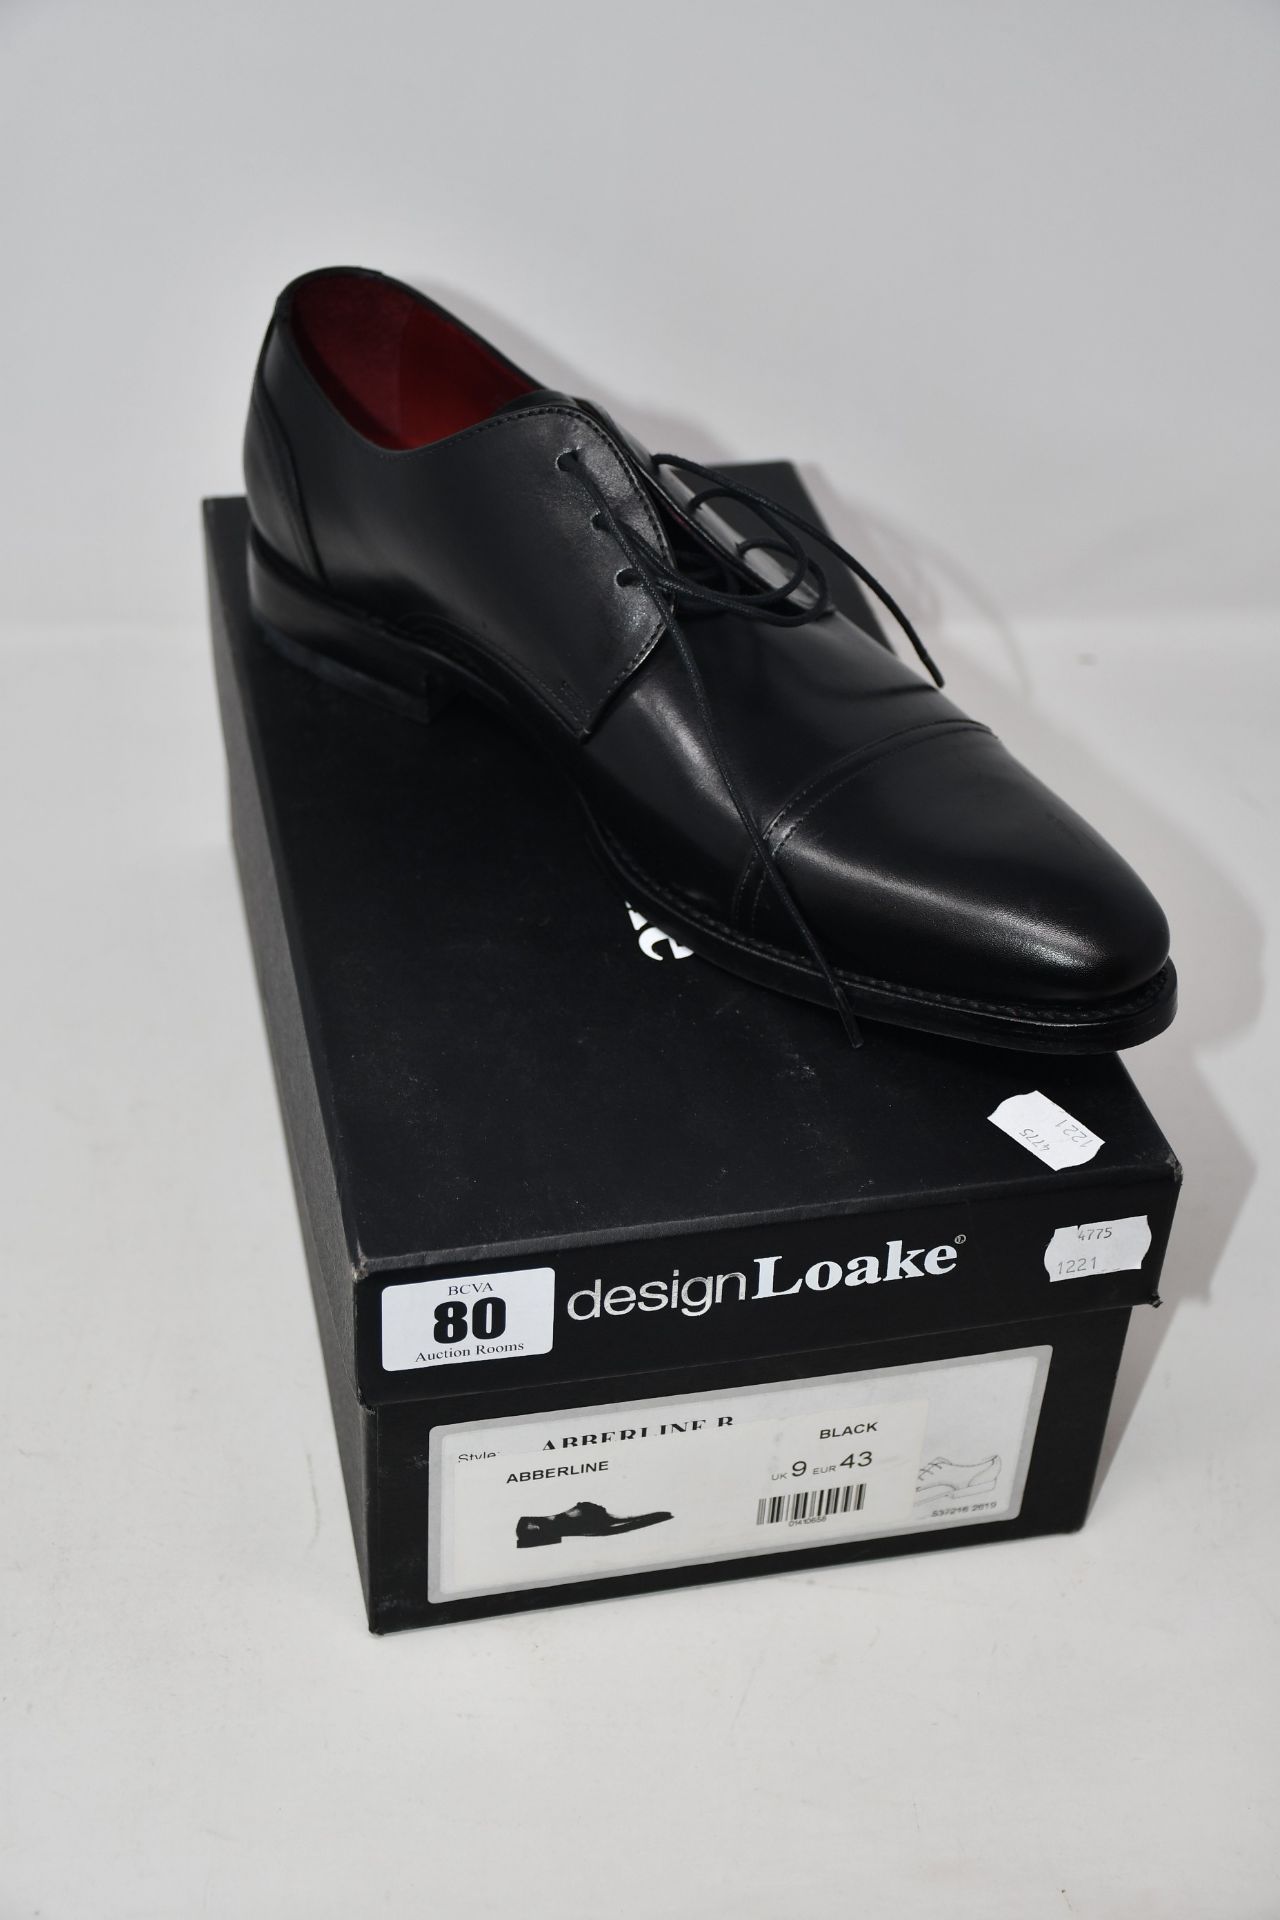 A pair of as new Loake Abberline shoes in black (UK 9 - RRP £175).